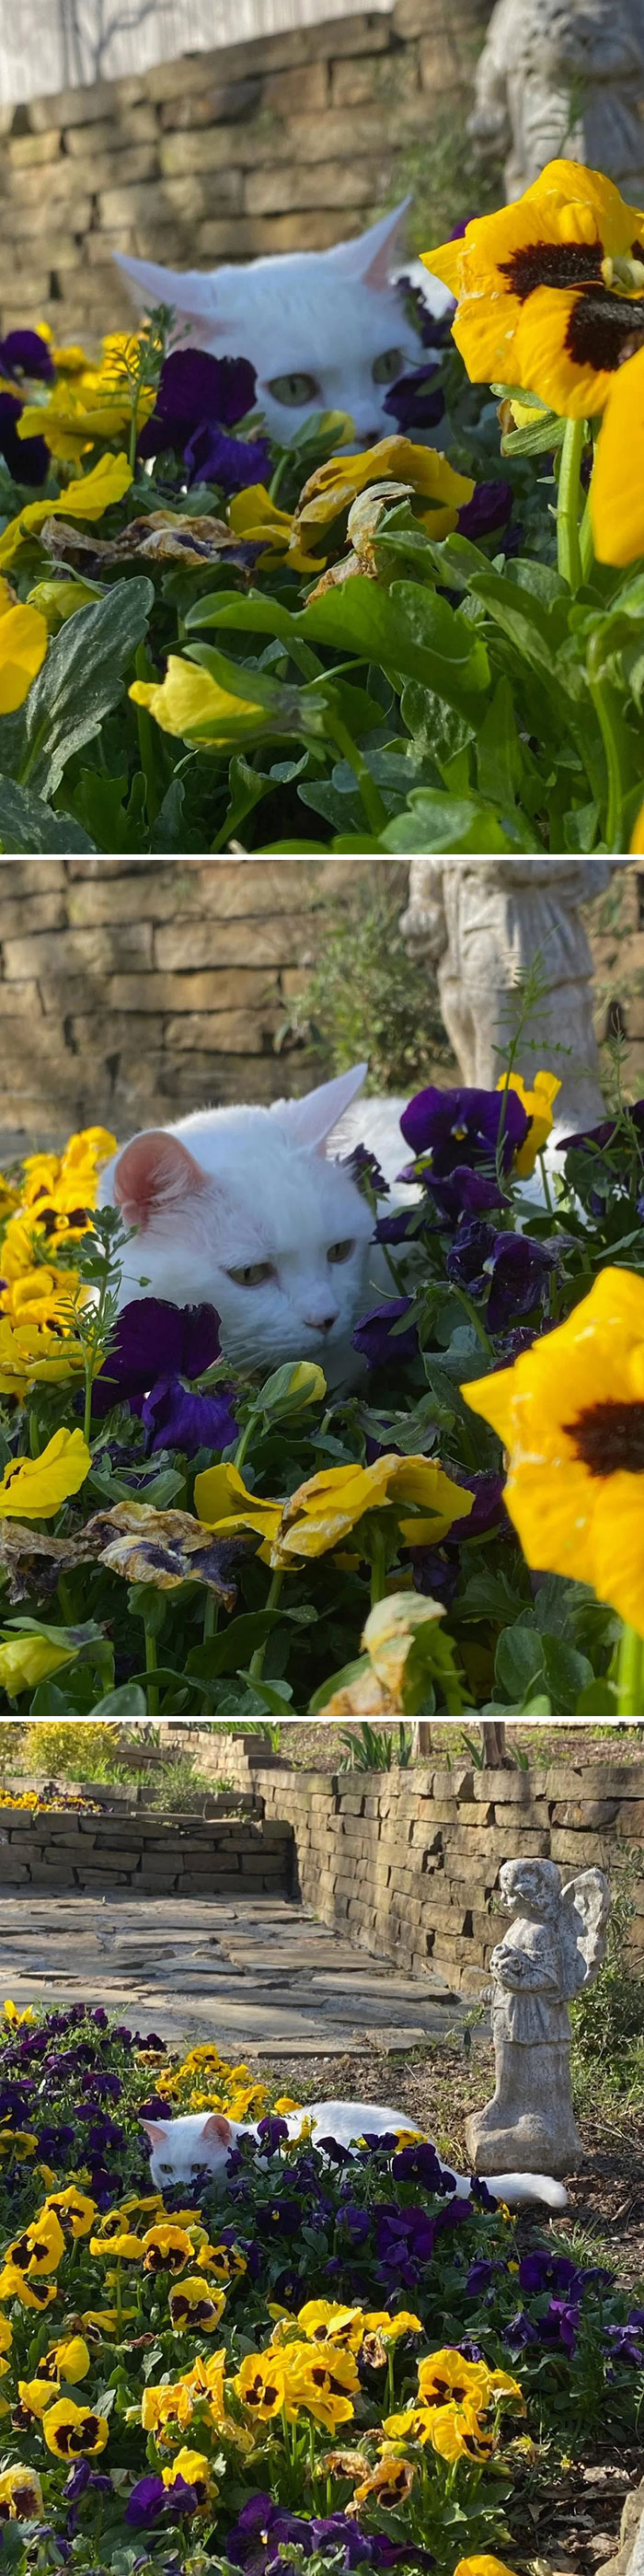 My Mom's Cat Tries To Hide In The Flowers But Her Coat Is Not Camouflaged